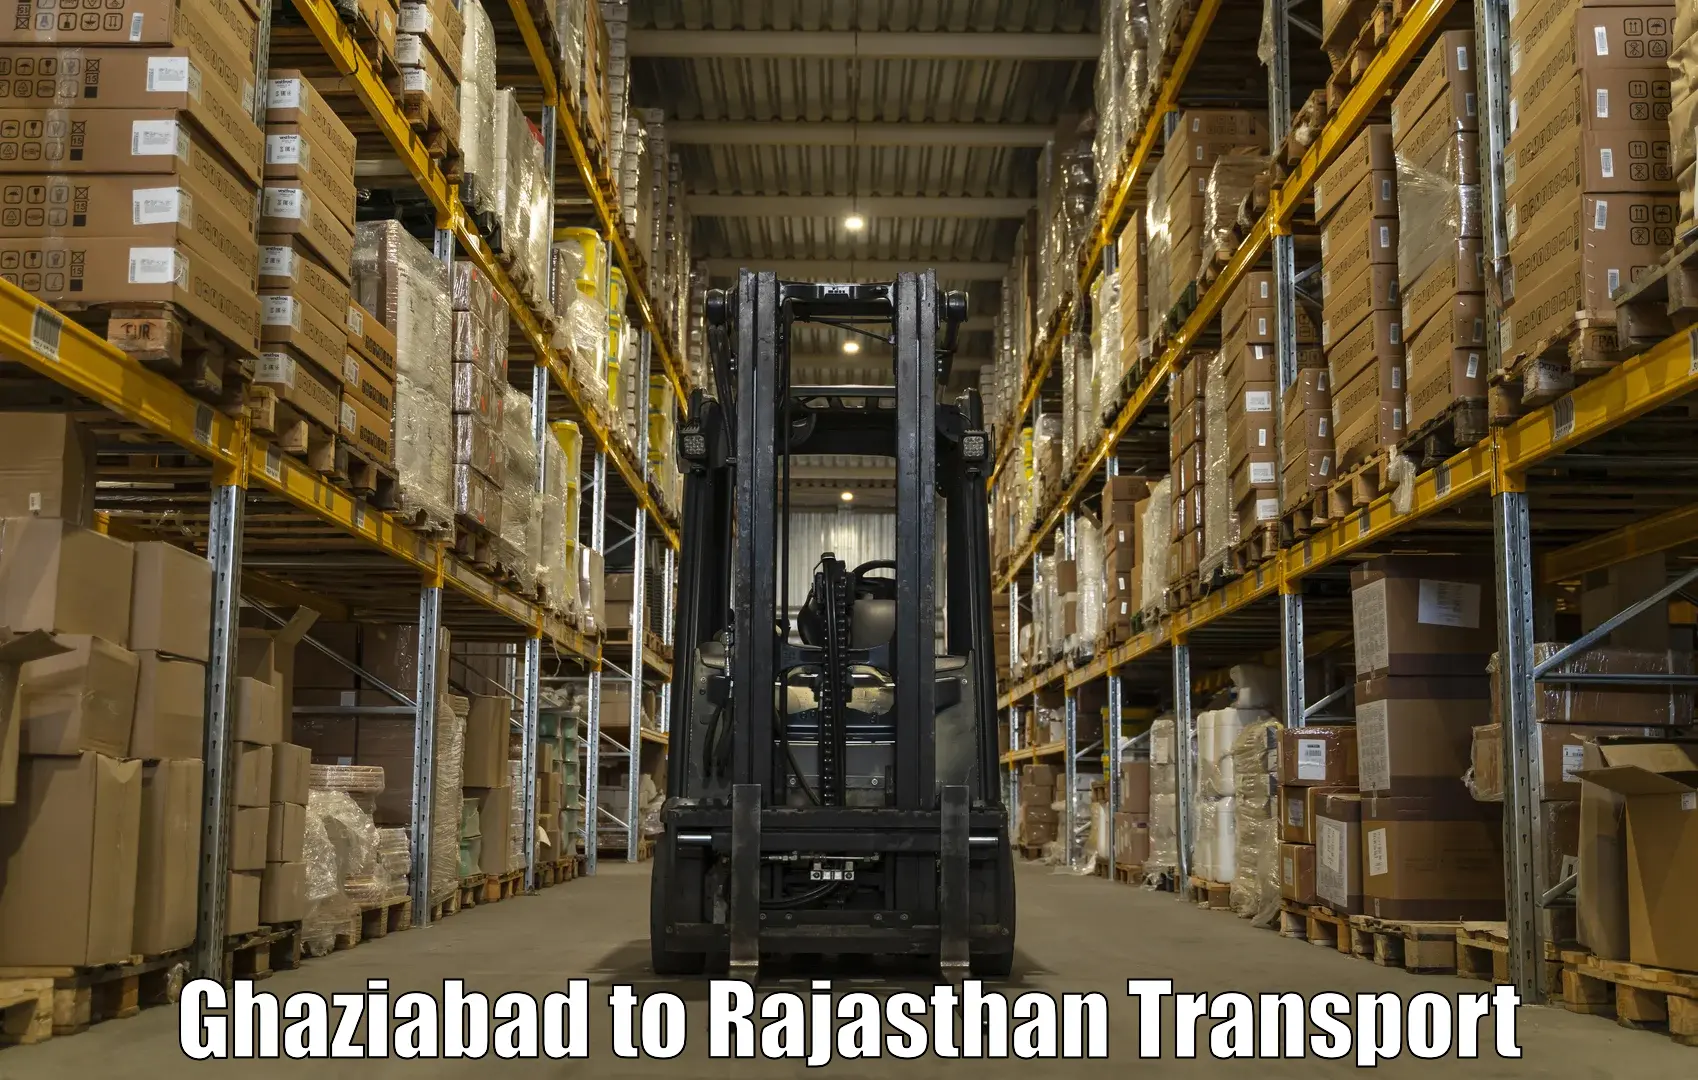 Truck transport companies in India Ghaziabad to Rajasthan